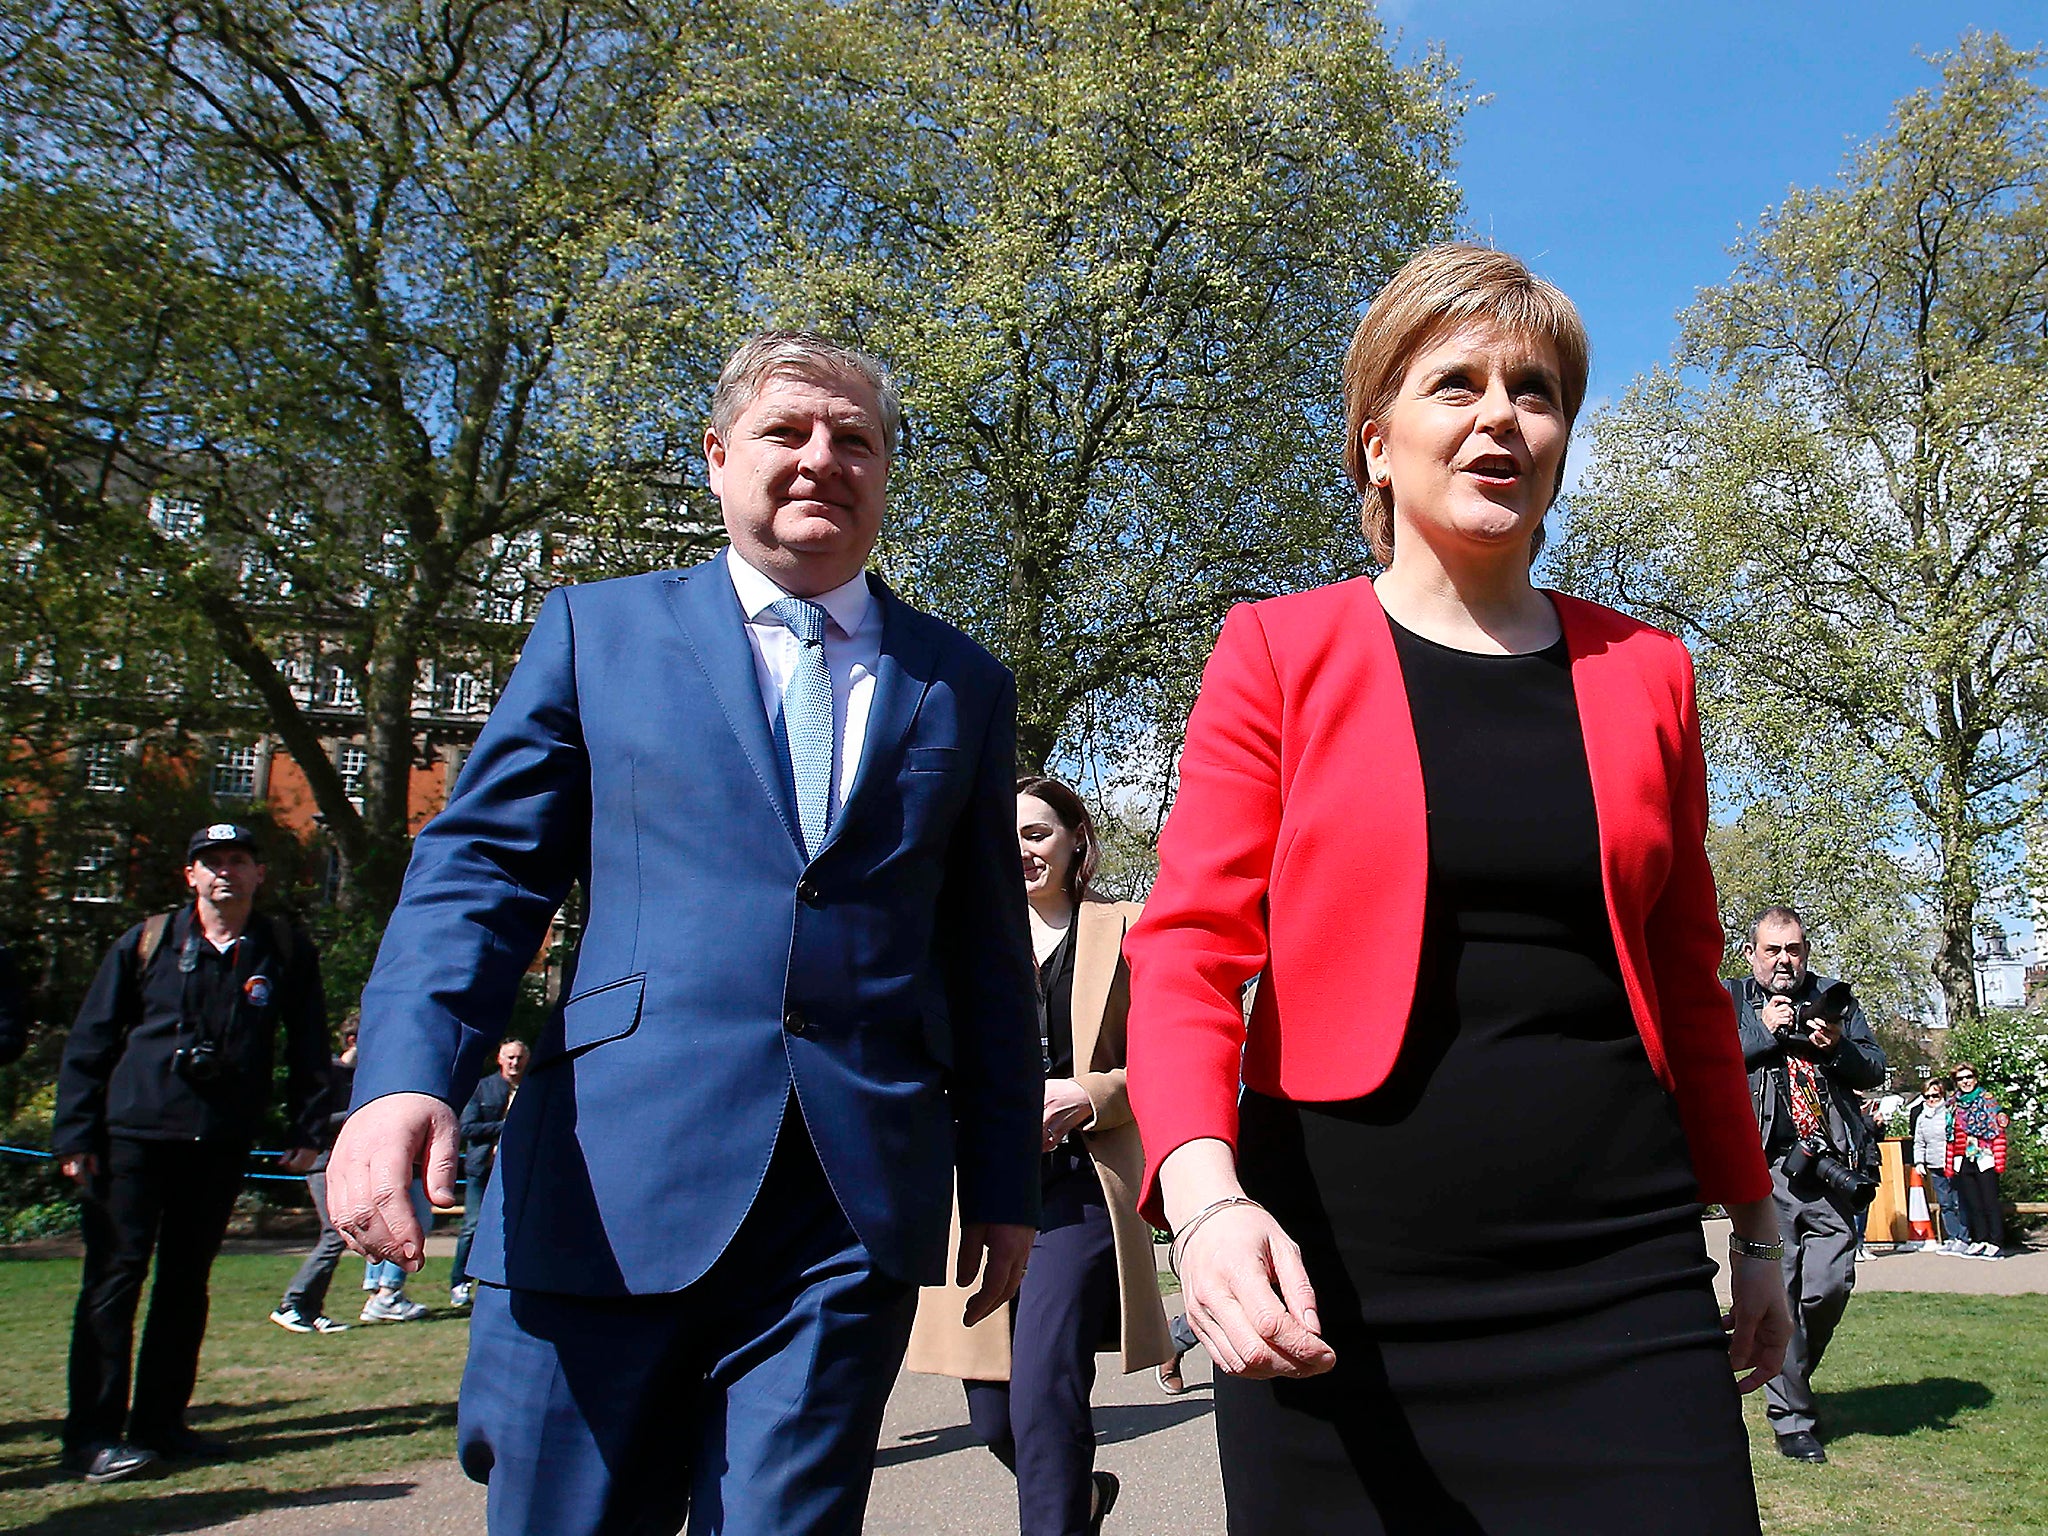 Scotland's First Minister and Scottish National Party leader Nicola Sturgeon walks with deputy leader and member of parliament Angus Robertson during a media facility outside the Houses of Parliament